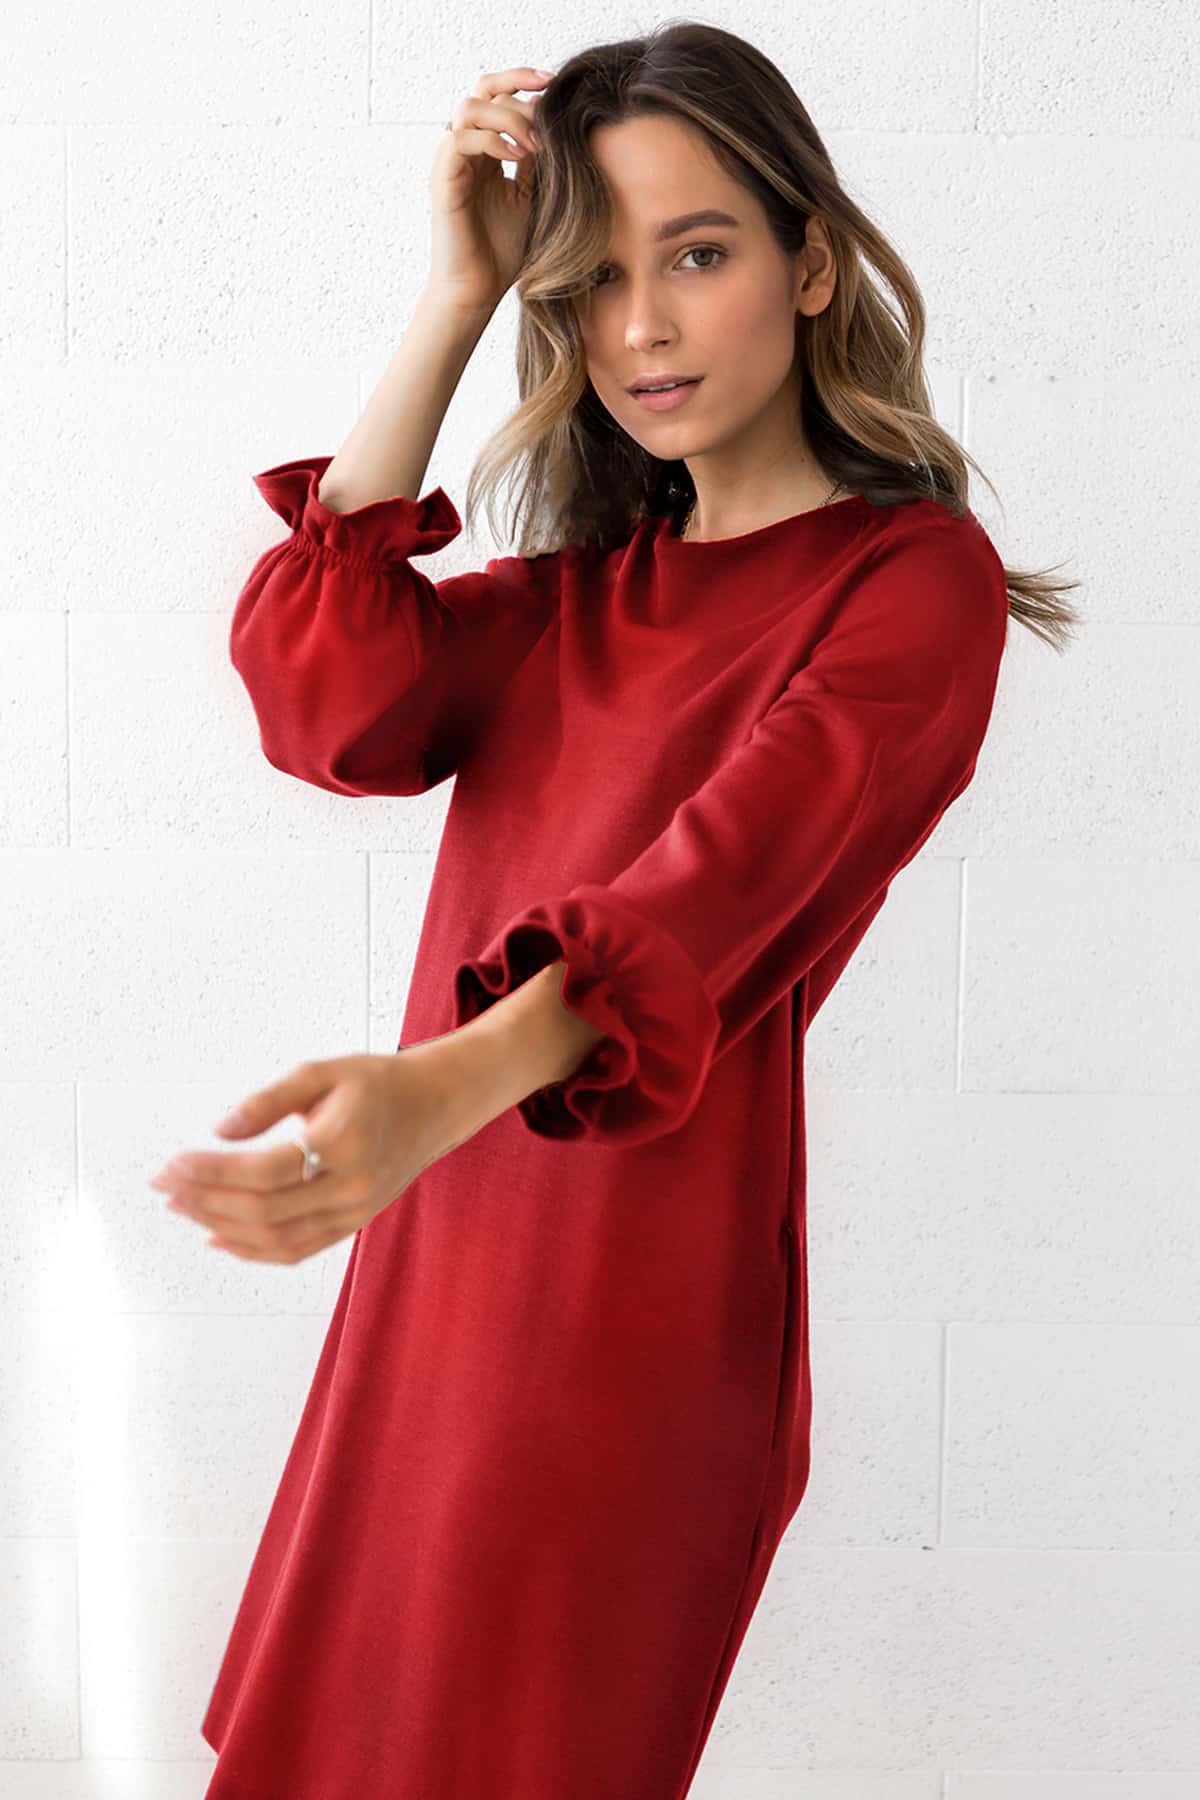 RED WOOL DRESS ALEXIS